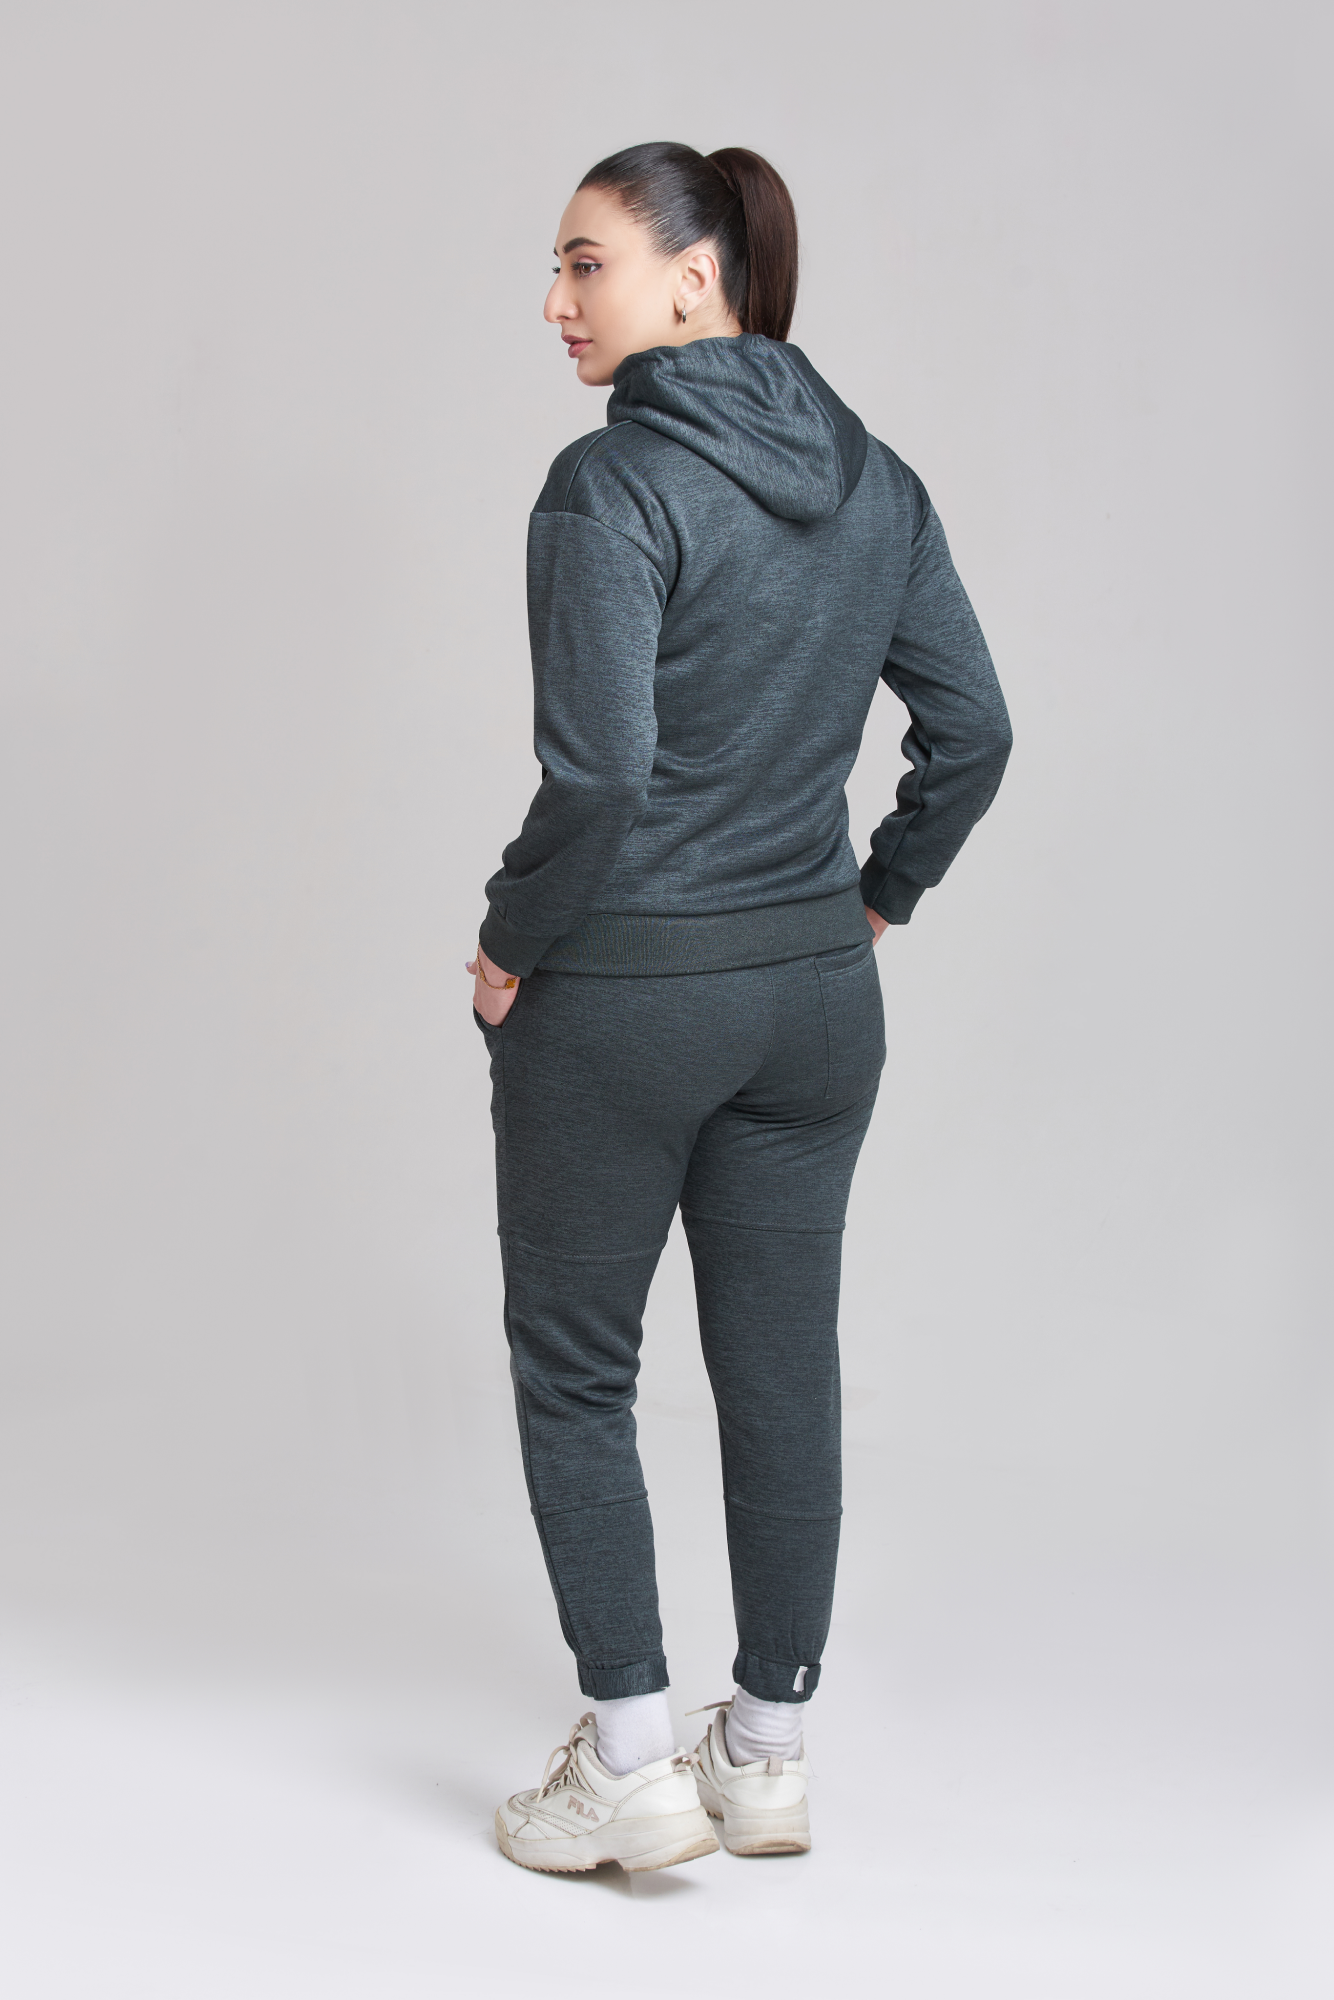 Braves-Vibes Charcoal Hoody Tracksuit - Women